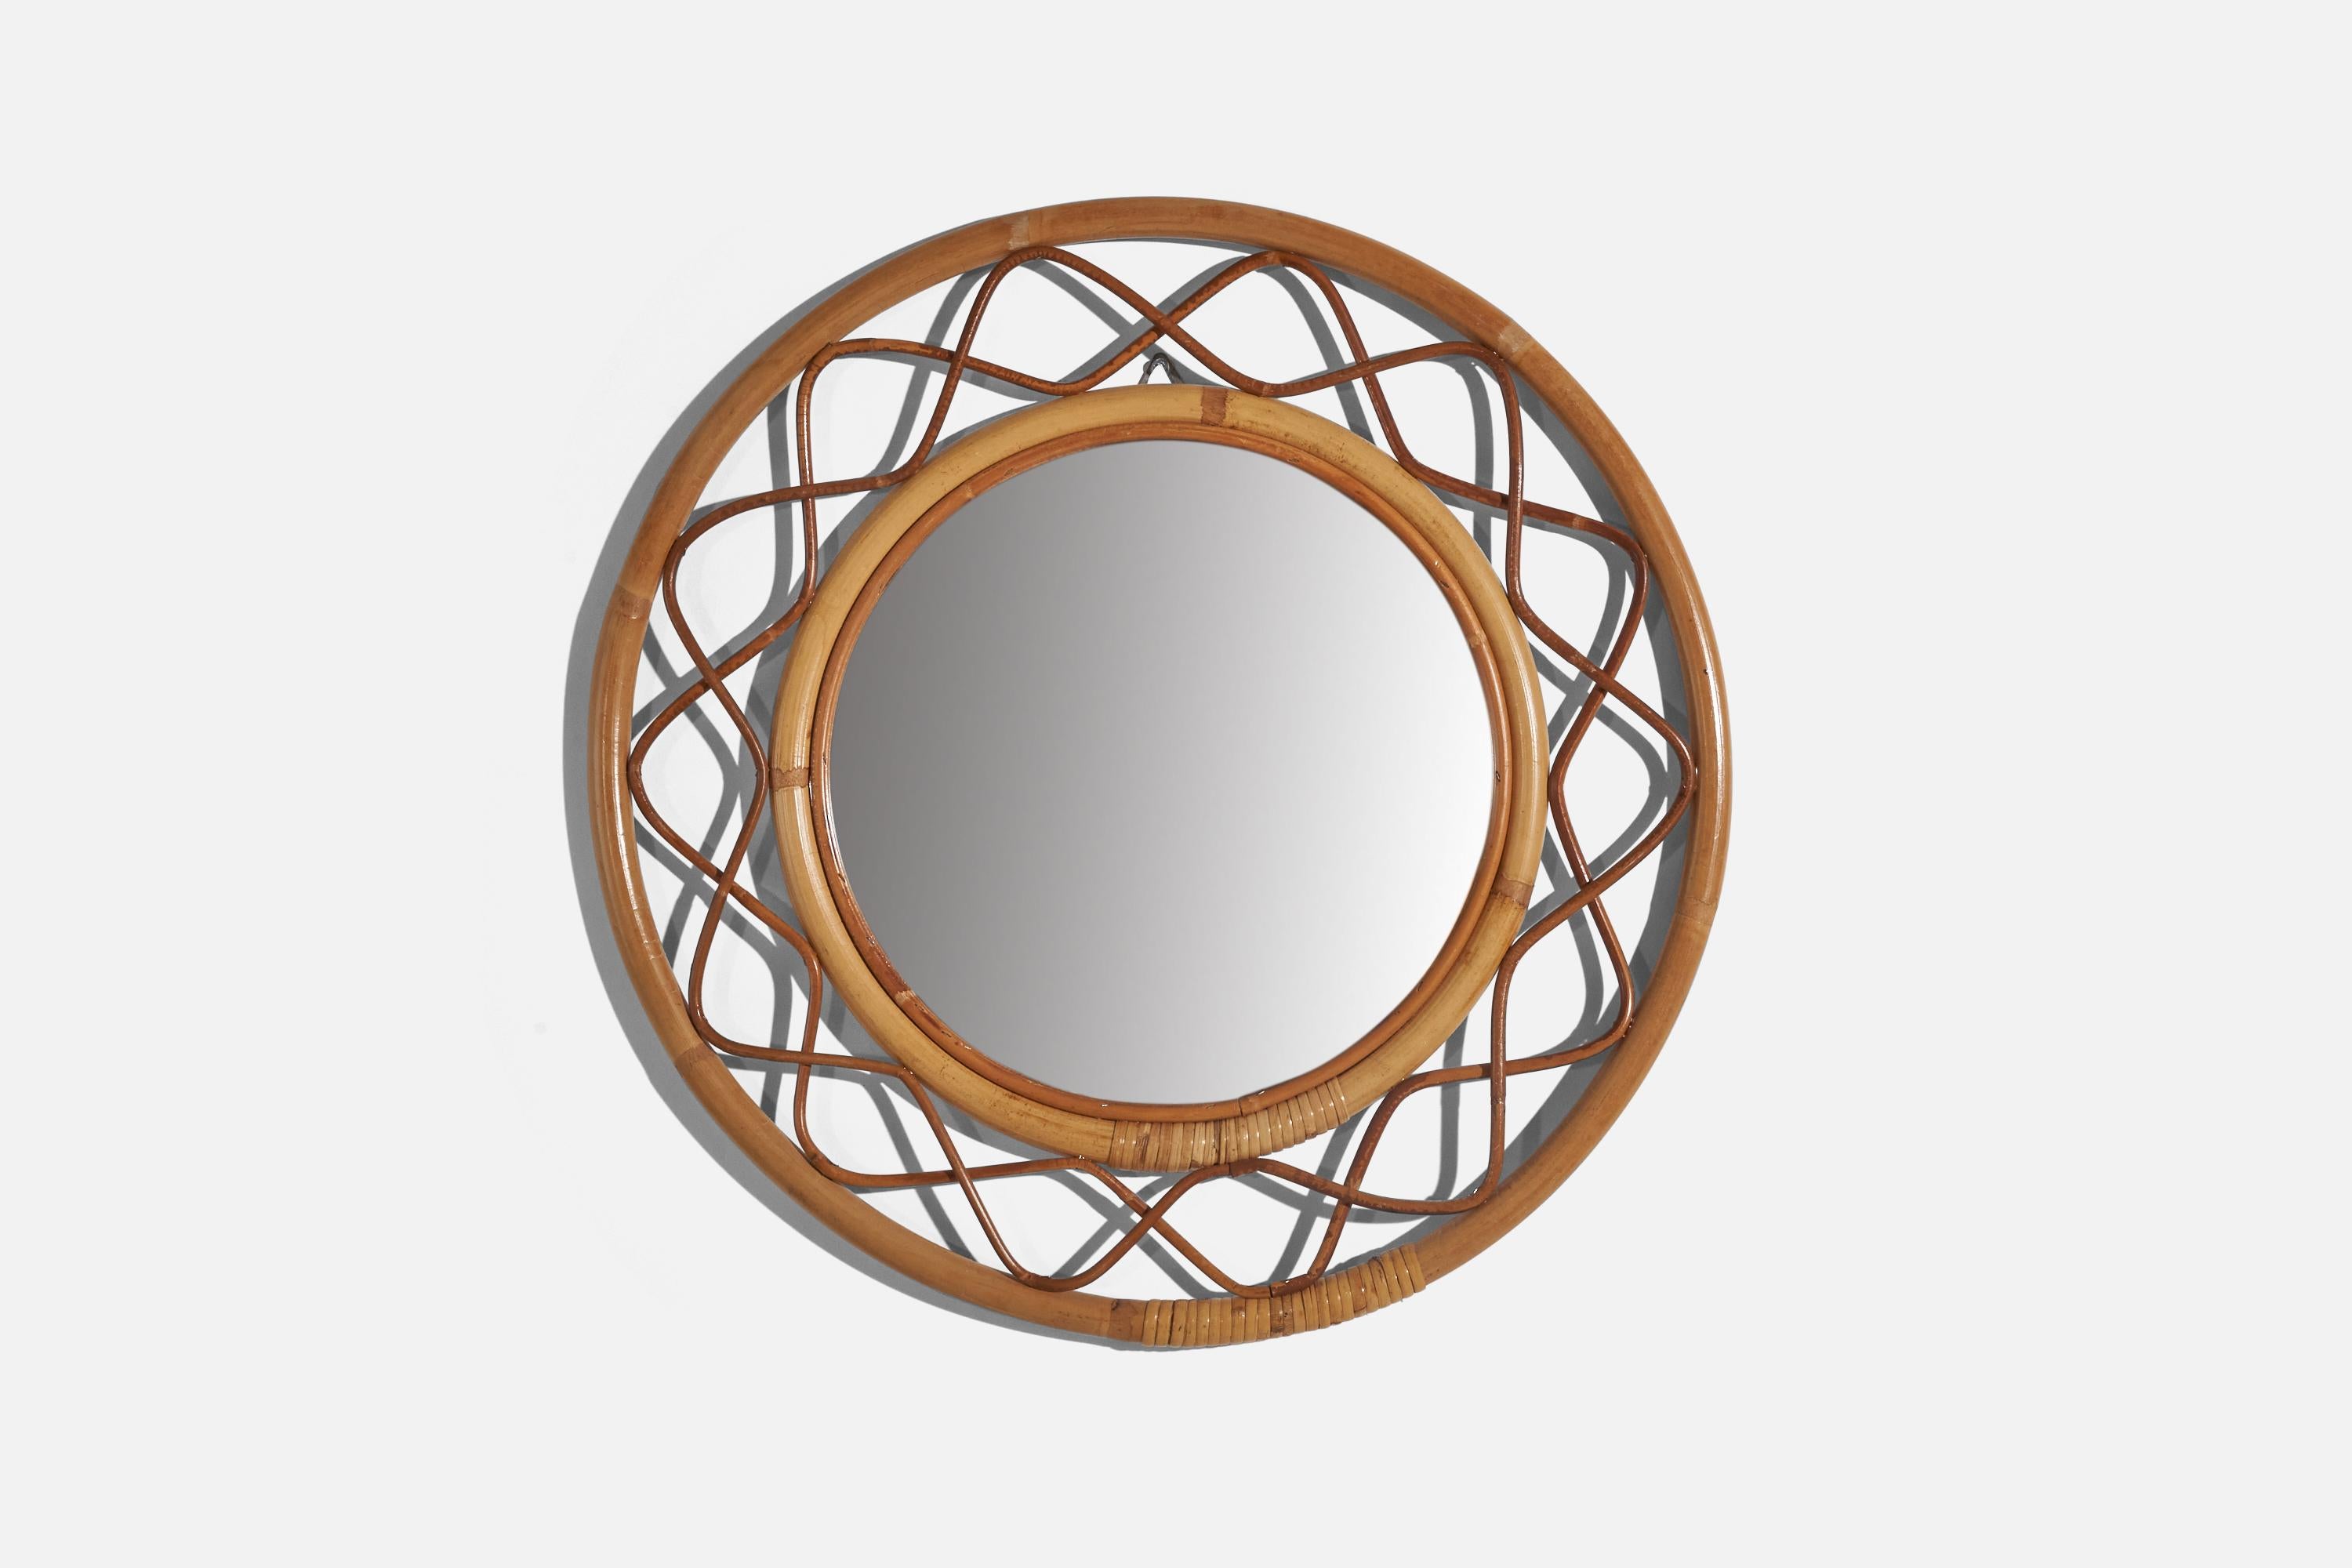 A wicker and bamboo wall mirror designed and produced by Svenskt Tenn, Sweden, 1950s. 